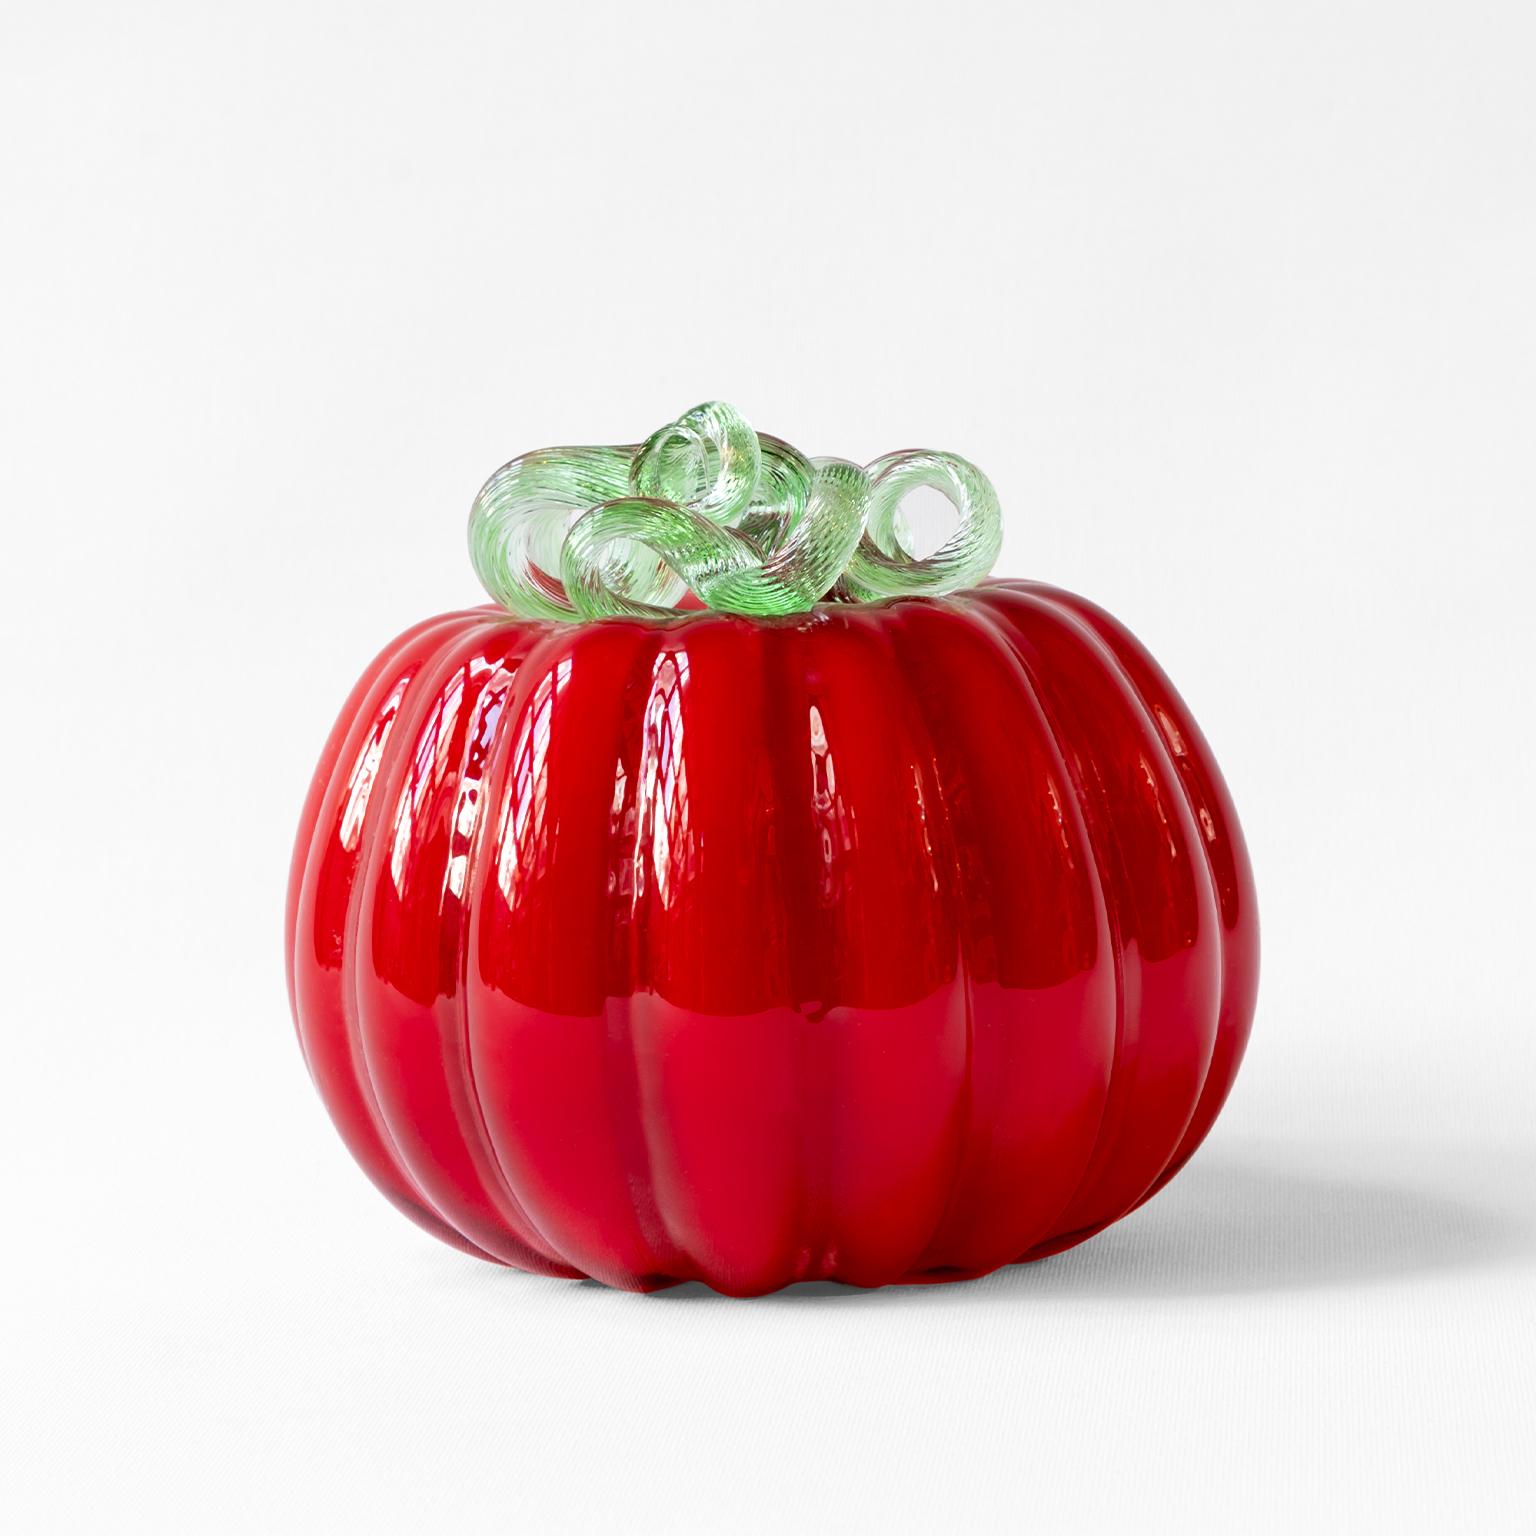 Red pumpkin, where beautiful colors come together in the form of a pumpkin, is a candidate to add color to your home!
-Made from hand blown glass.
-A unique hand made decorative object.
-Designed by experienced glass blowers in a pumpkin